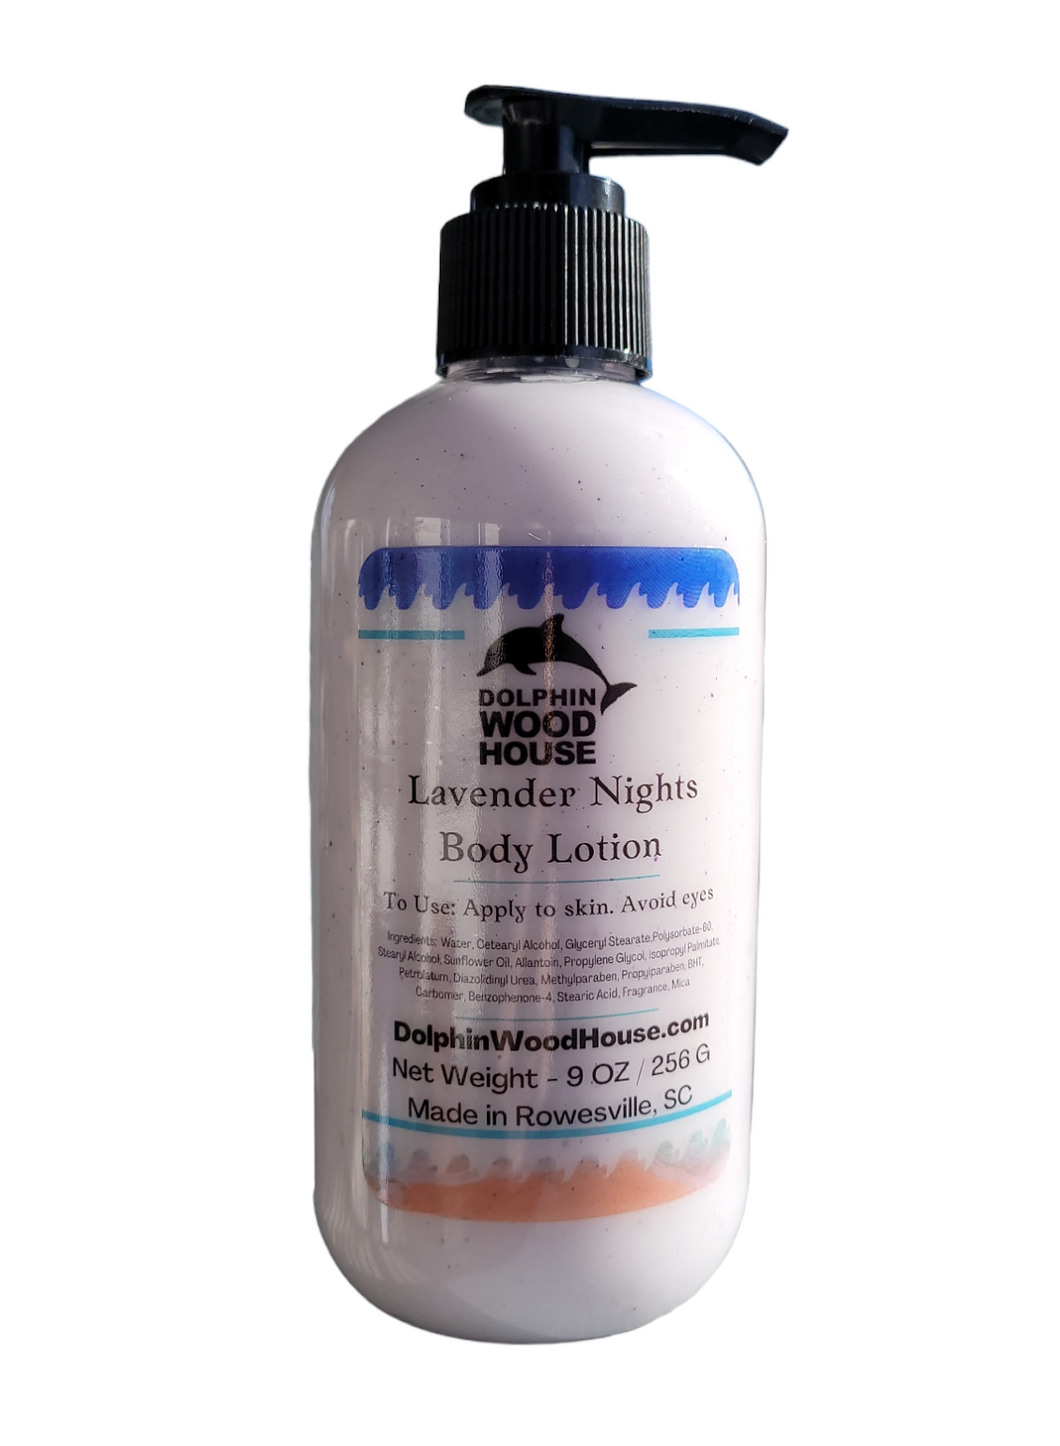 This lotion soaks into your skin like heaven and leaves a light lavender fragrance. • 8 oz container with pump type lid • Very relaxing lavender fragrance • A little goes a long way